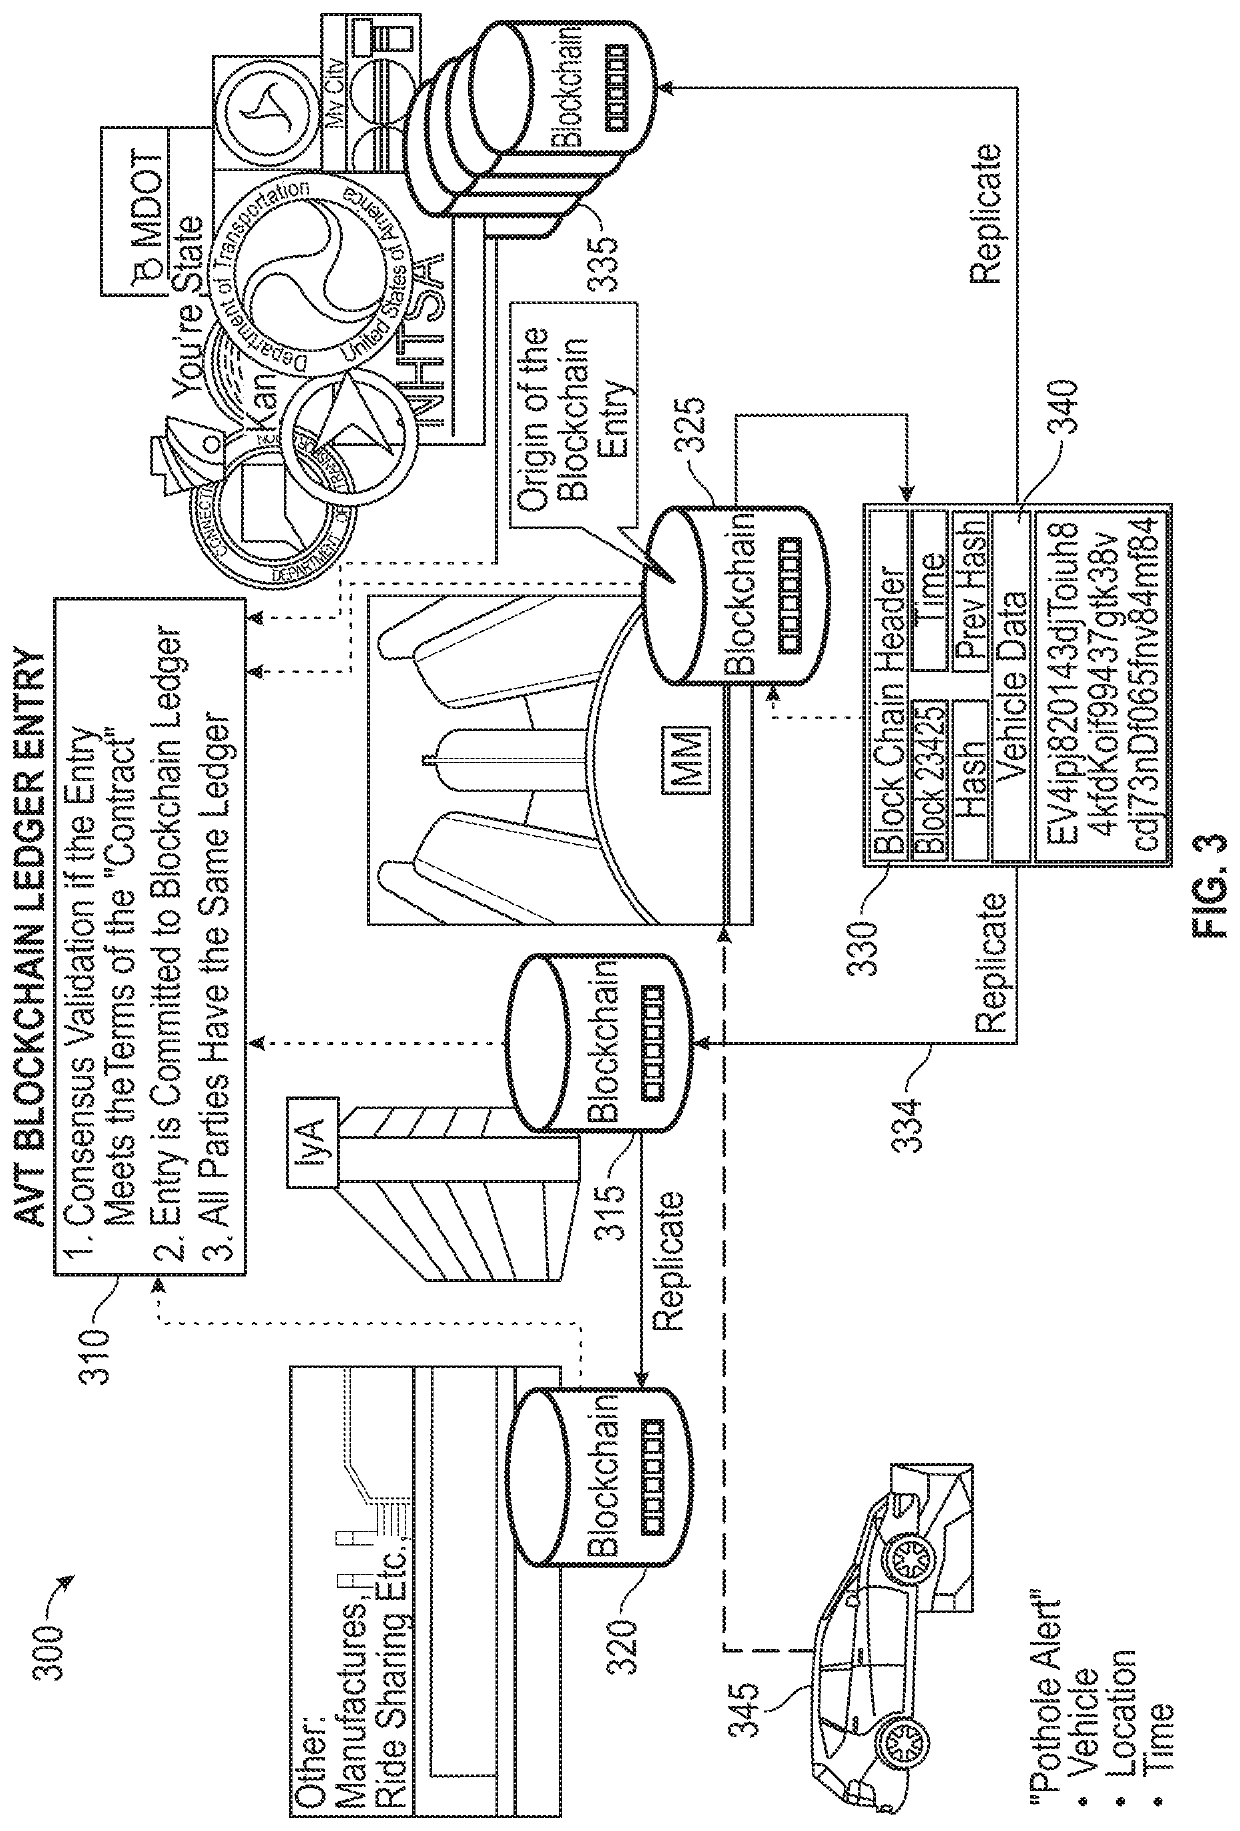 Method and system using a blockchain database for data exchange between vehicles and entities